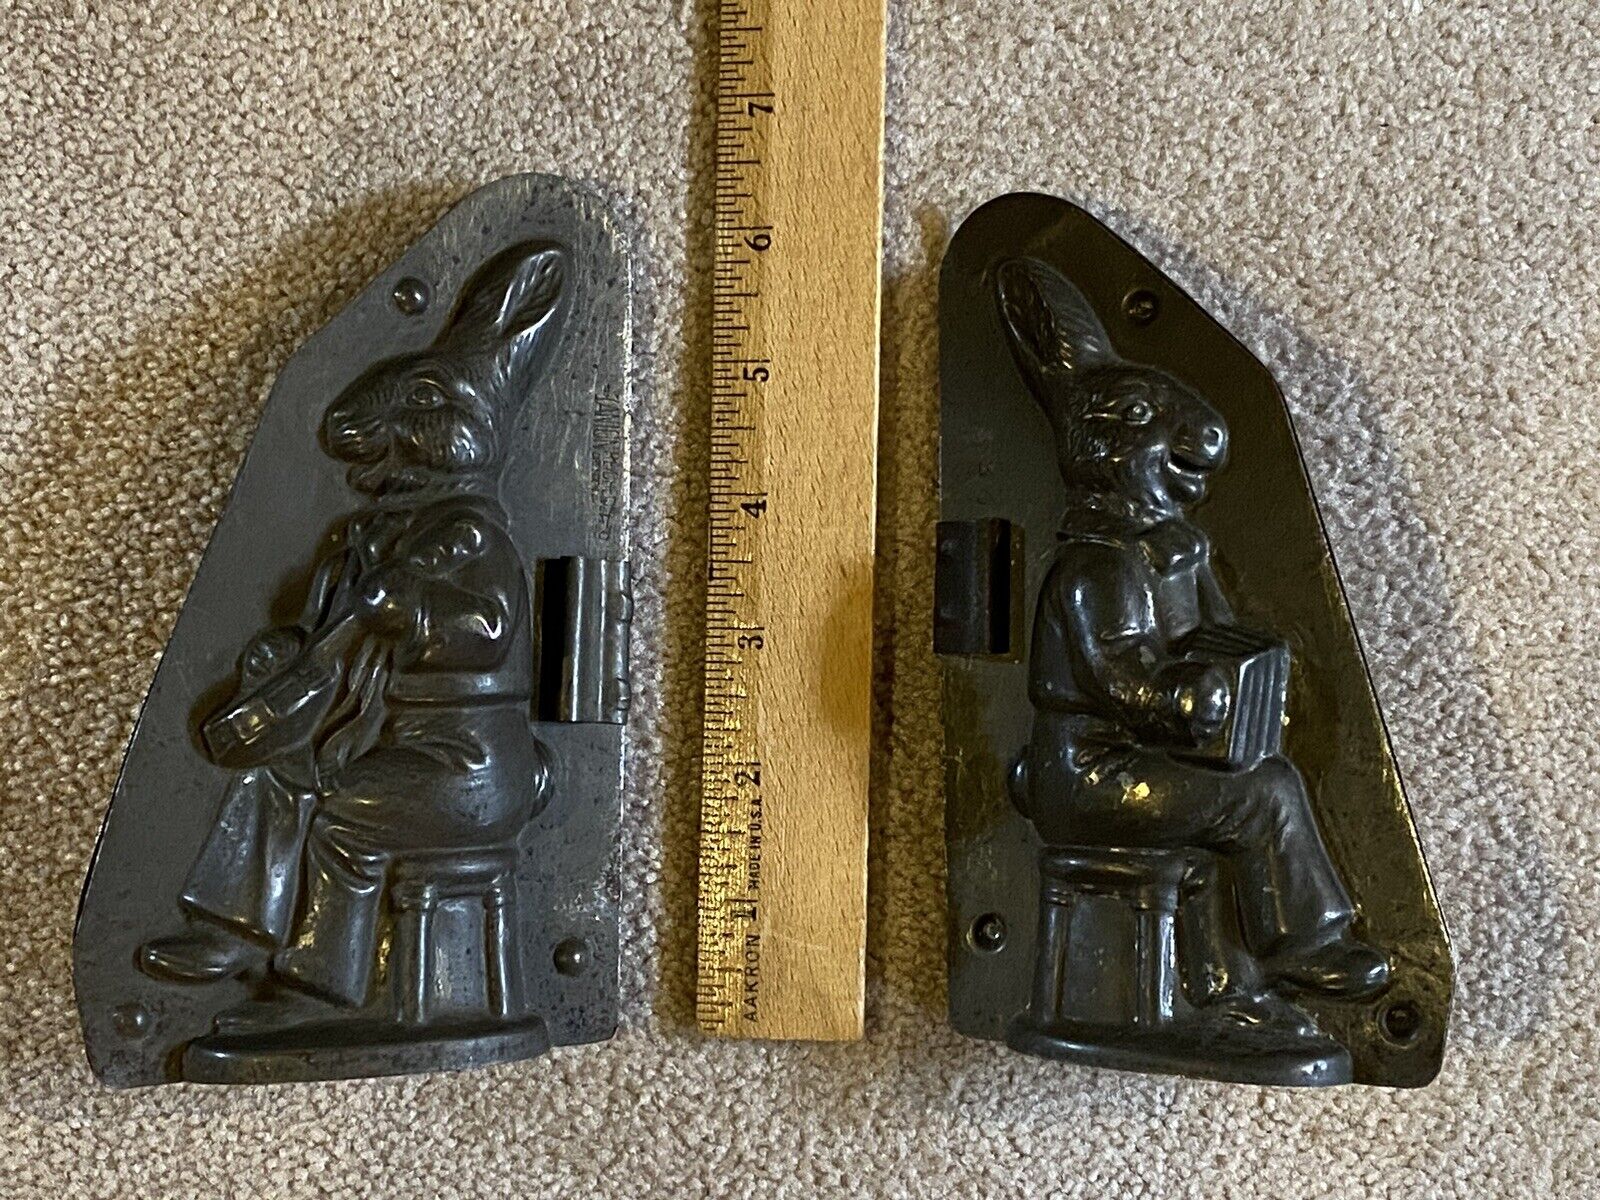 Antique Chocolate Molds Anton Reiche Bunny Rabbit Jazz Band And Halloween Witch